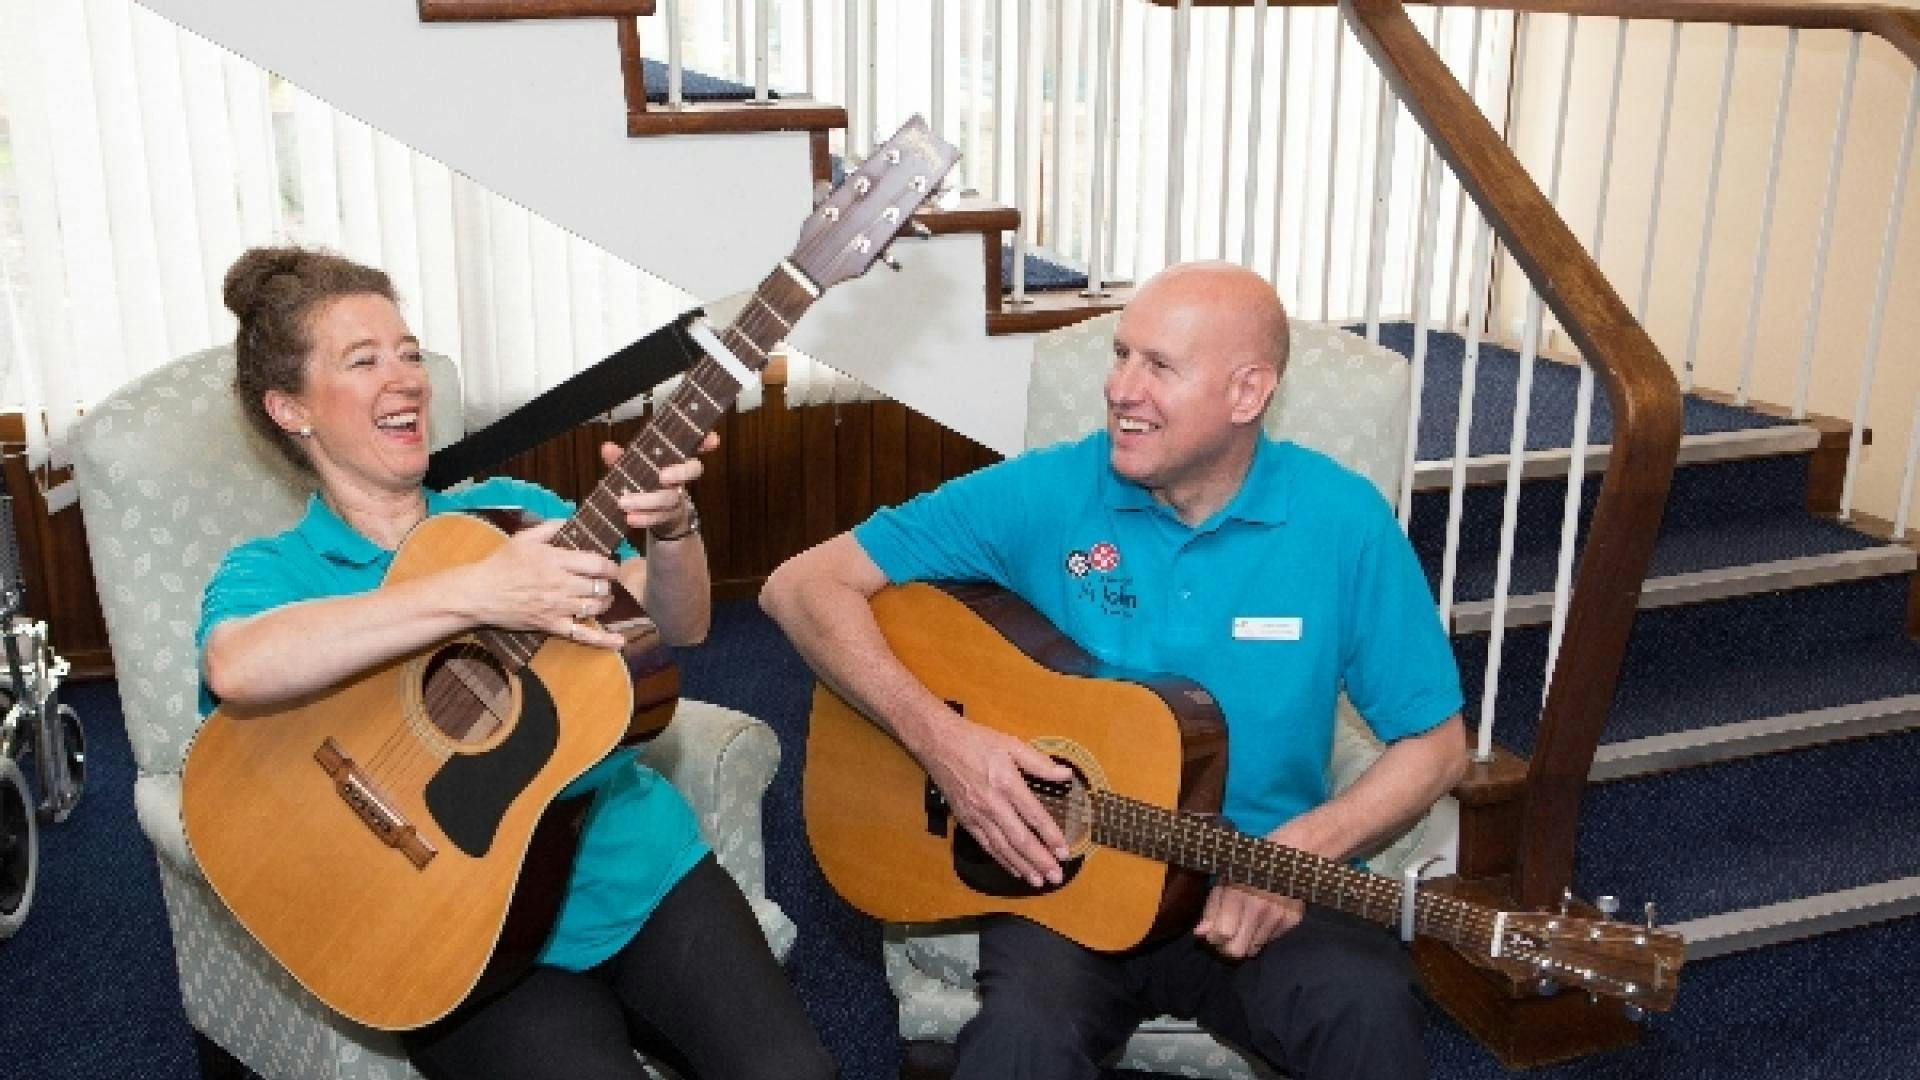 Entertainment at Grevill House Care Home in Cheltenham, Gloucestershire